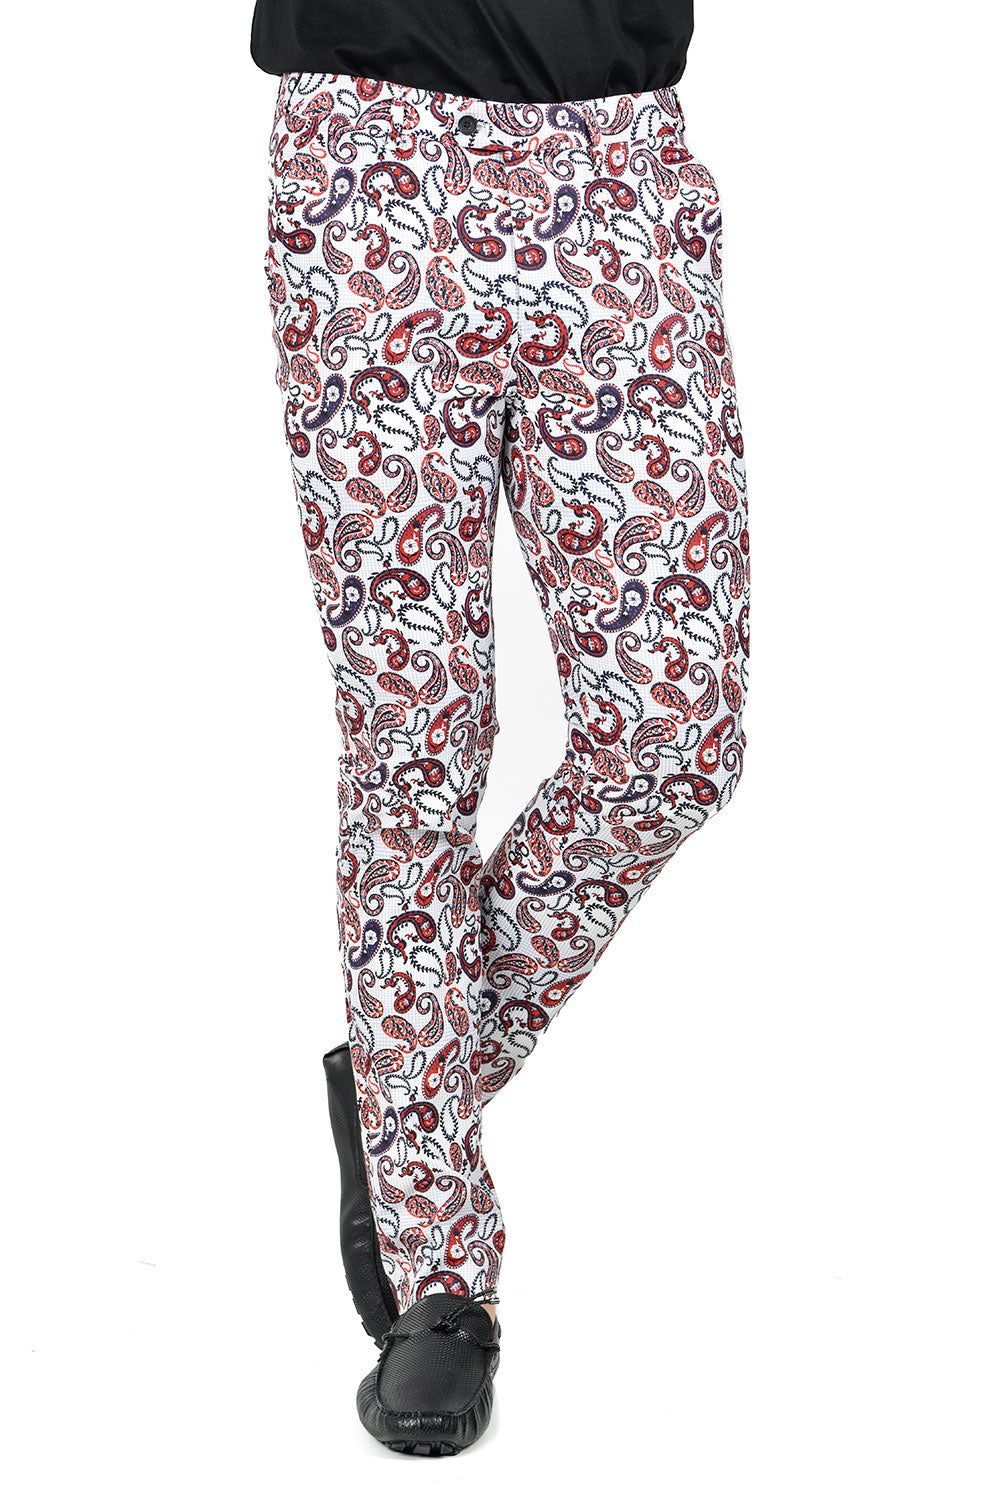 BARABAS Men's Paisley Design Classic Casual Chino Pants CP113 White Red